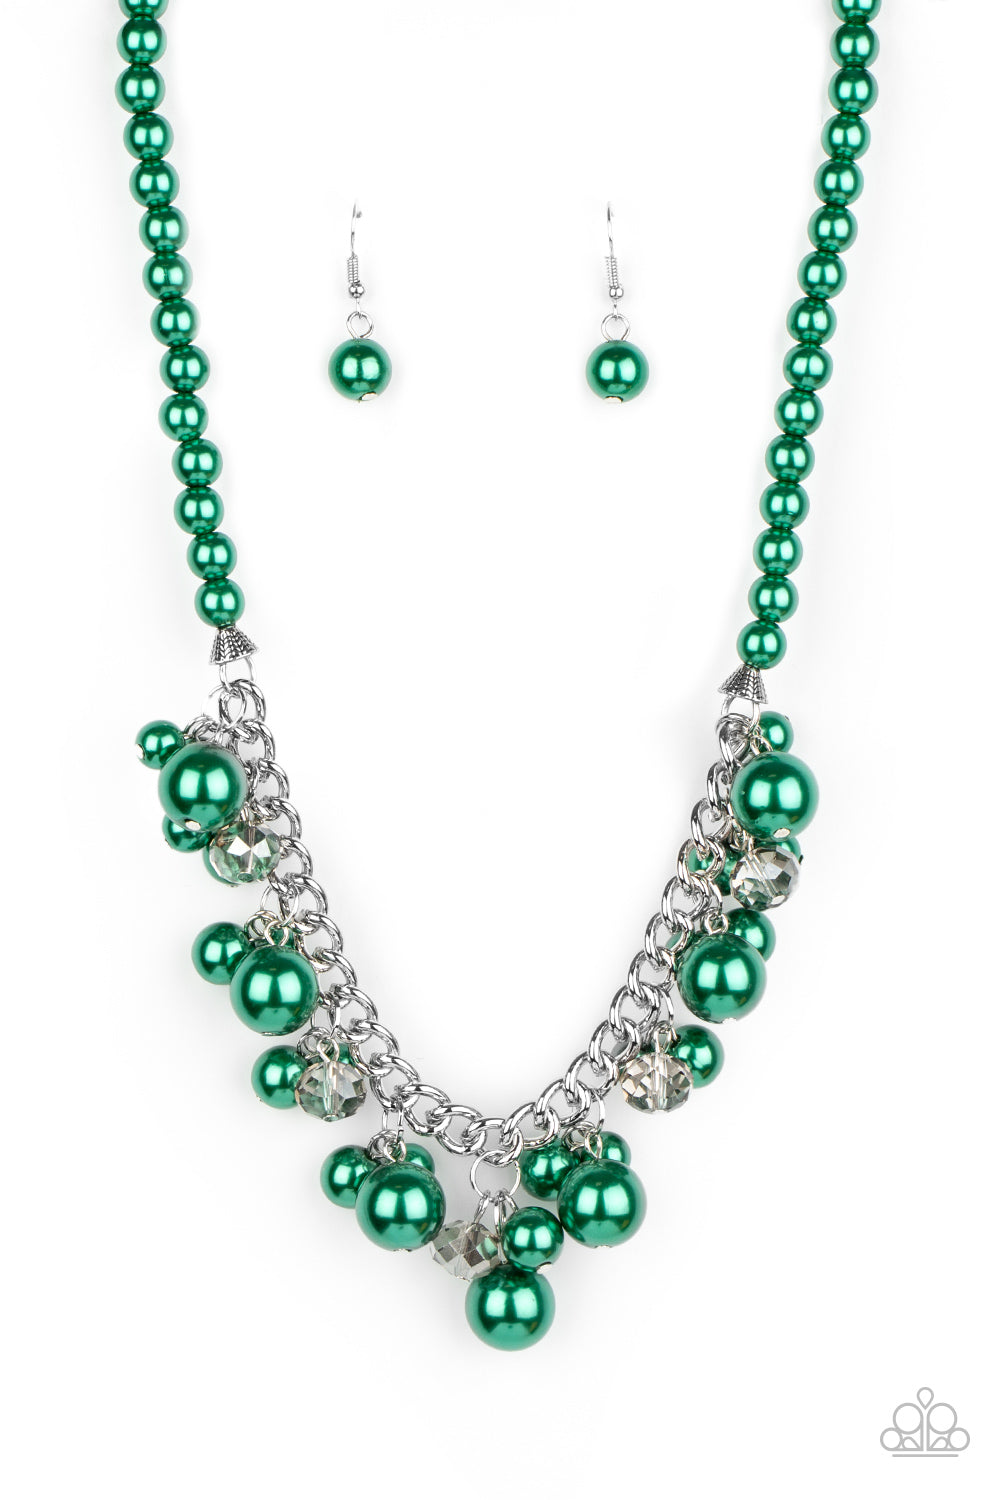 Paparazzi - Prim and POLISHED - Green Necklace